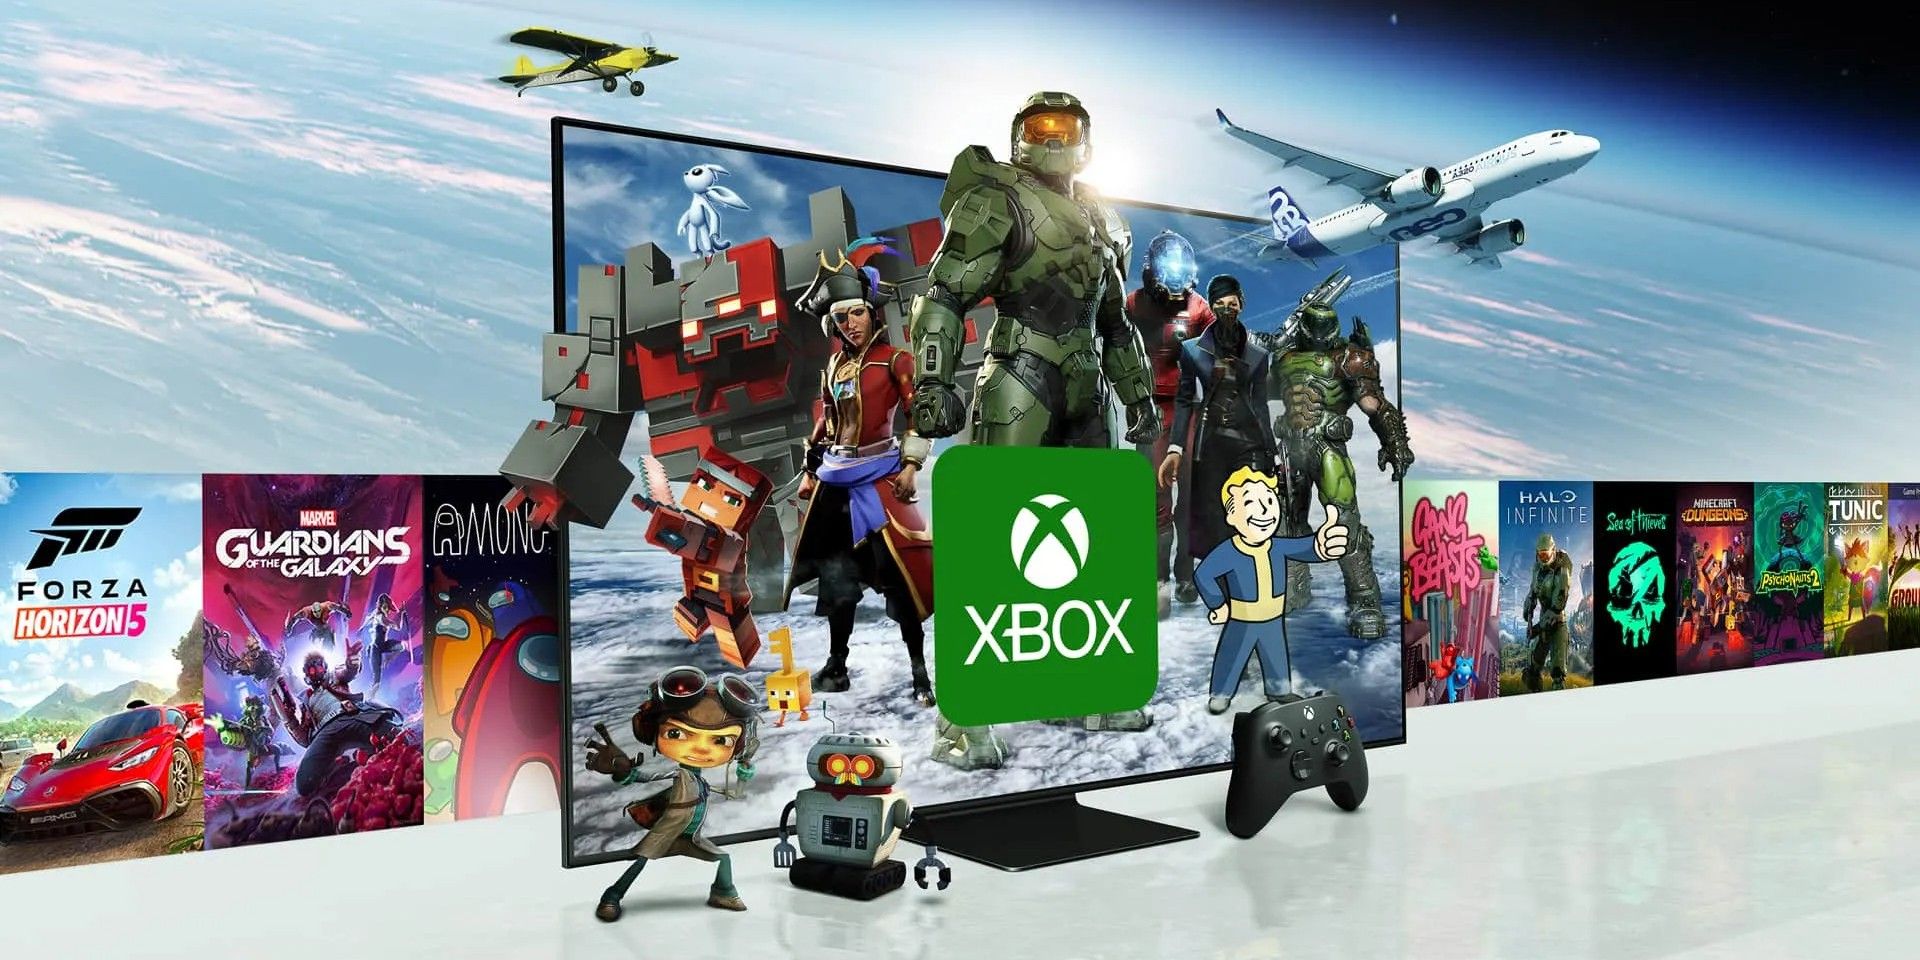 A television showing the Xbox logo, Xbox Game Pass games, and famous characters like Master Chief emerging from the screen..